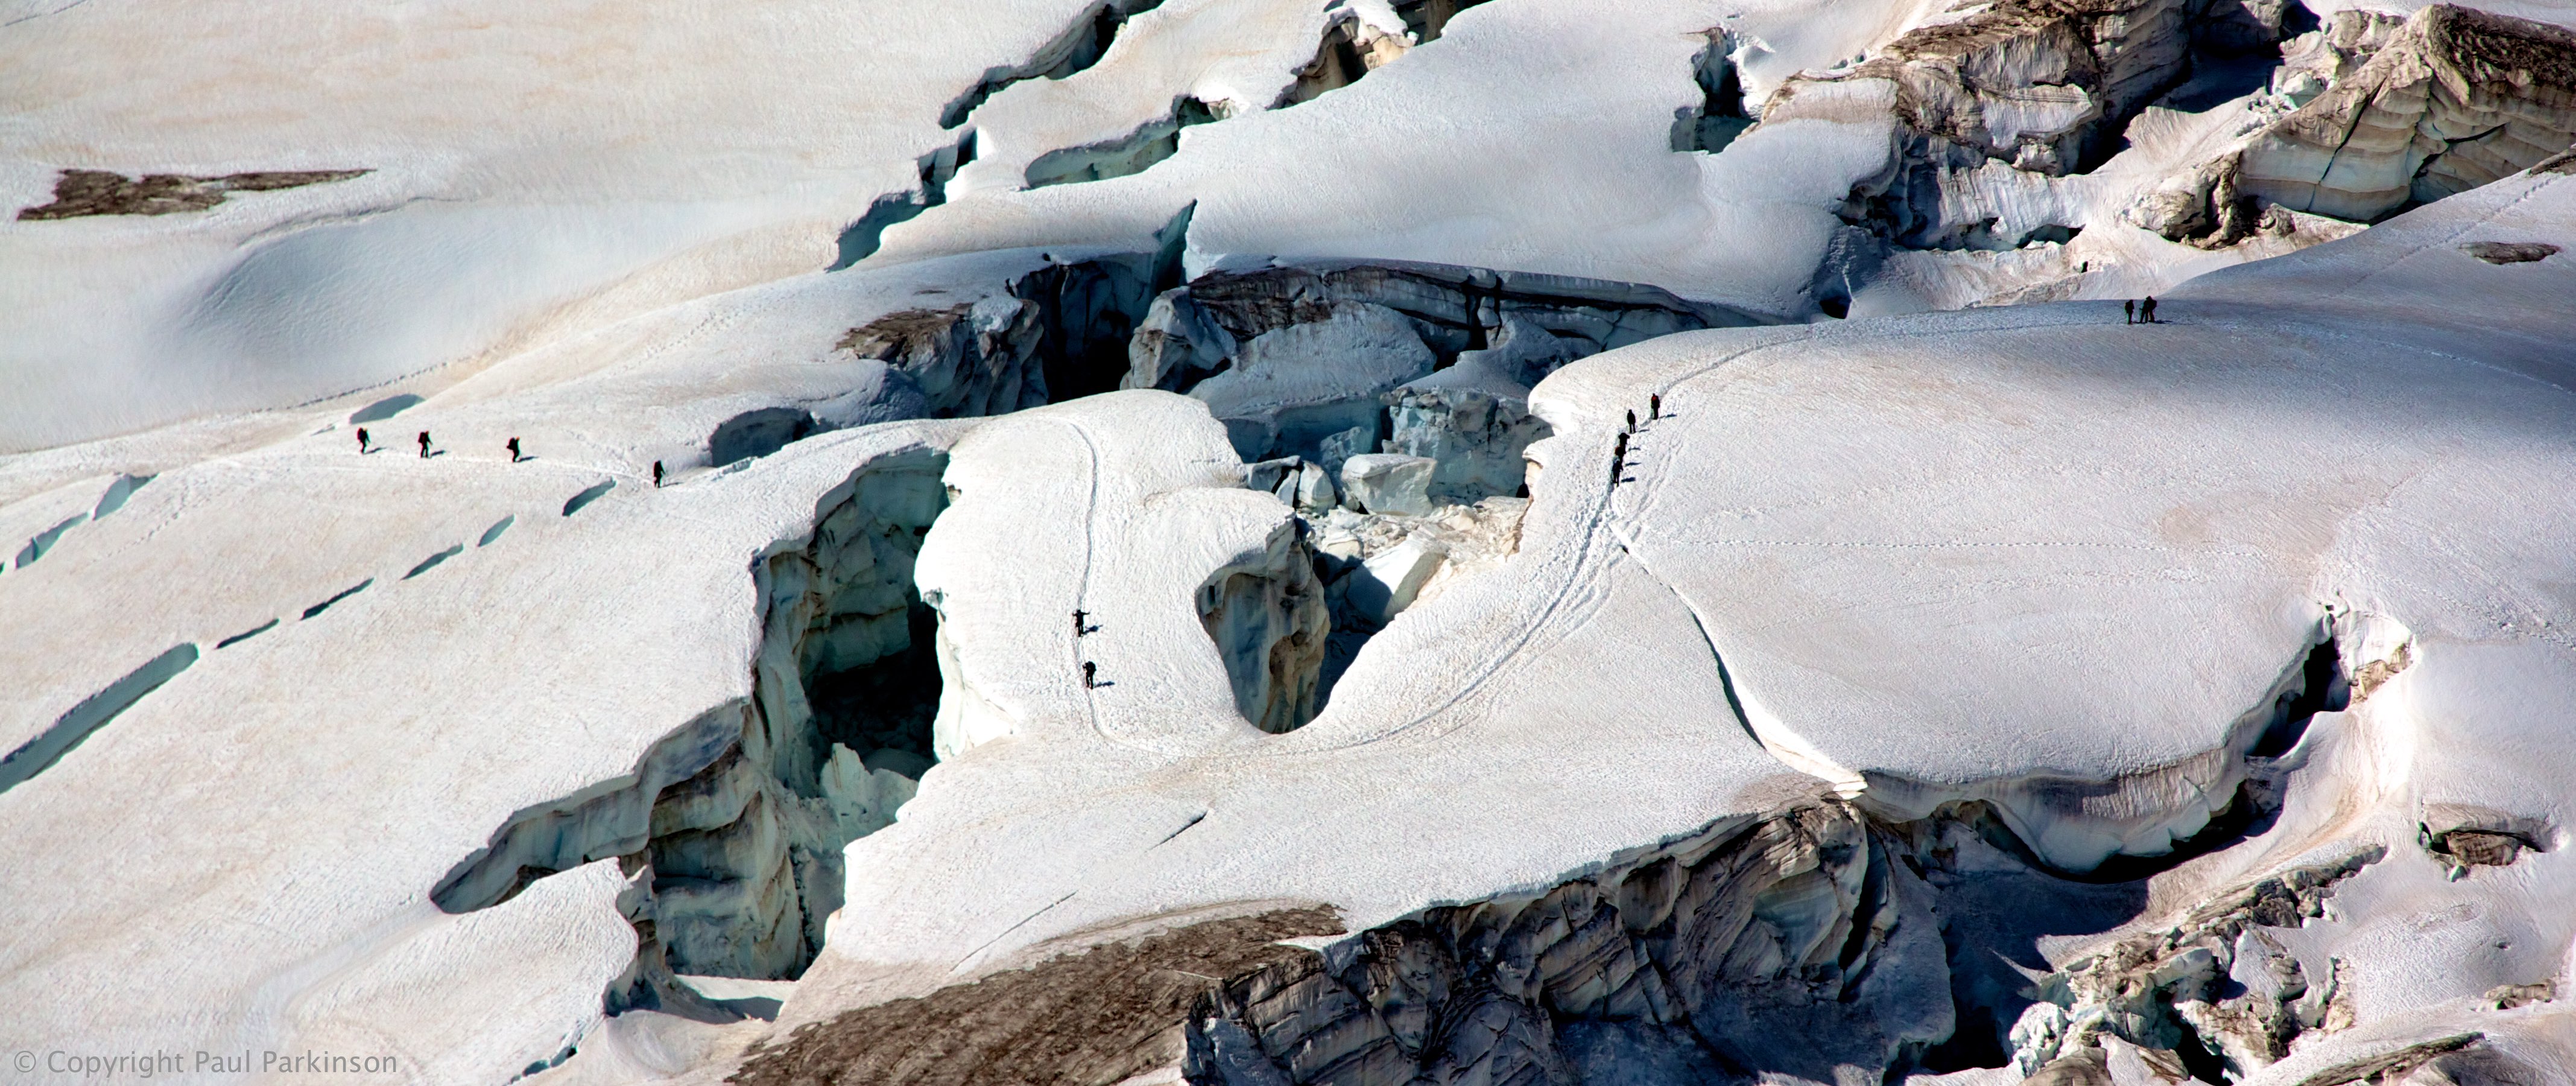 banner image: Alpinists crossing the Vallee Blanche, Mont Blanc, Chamonix